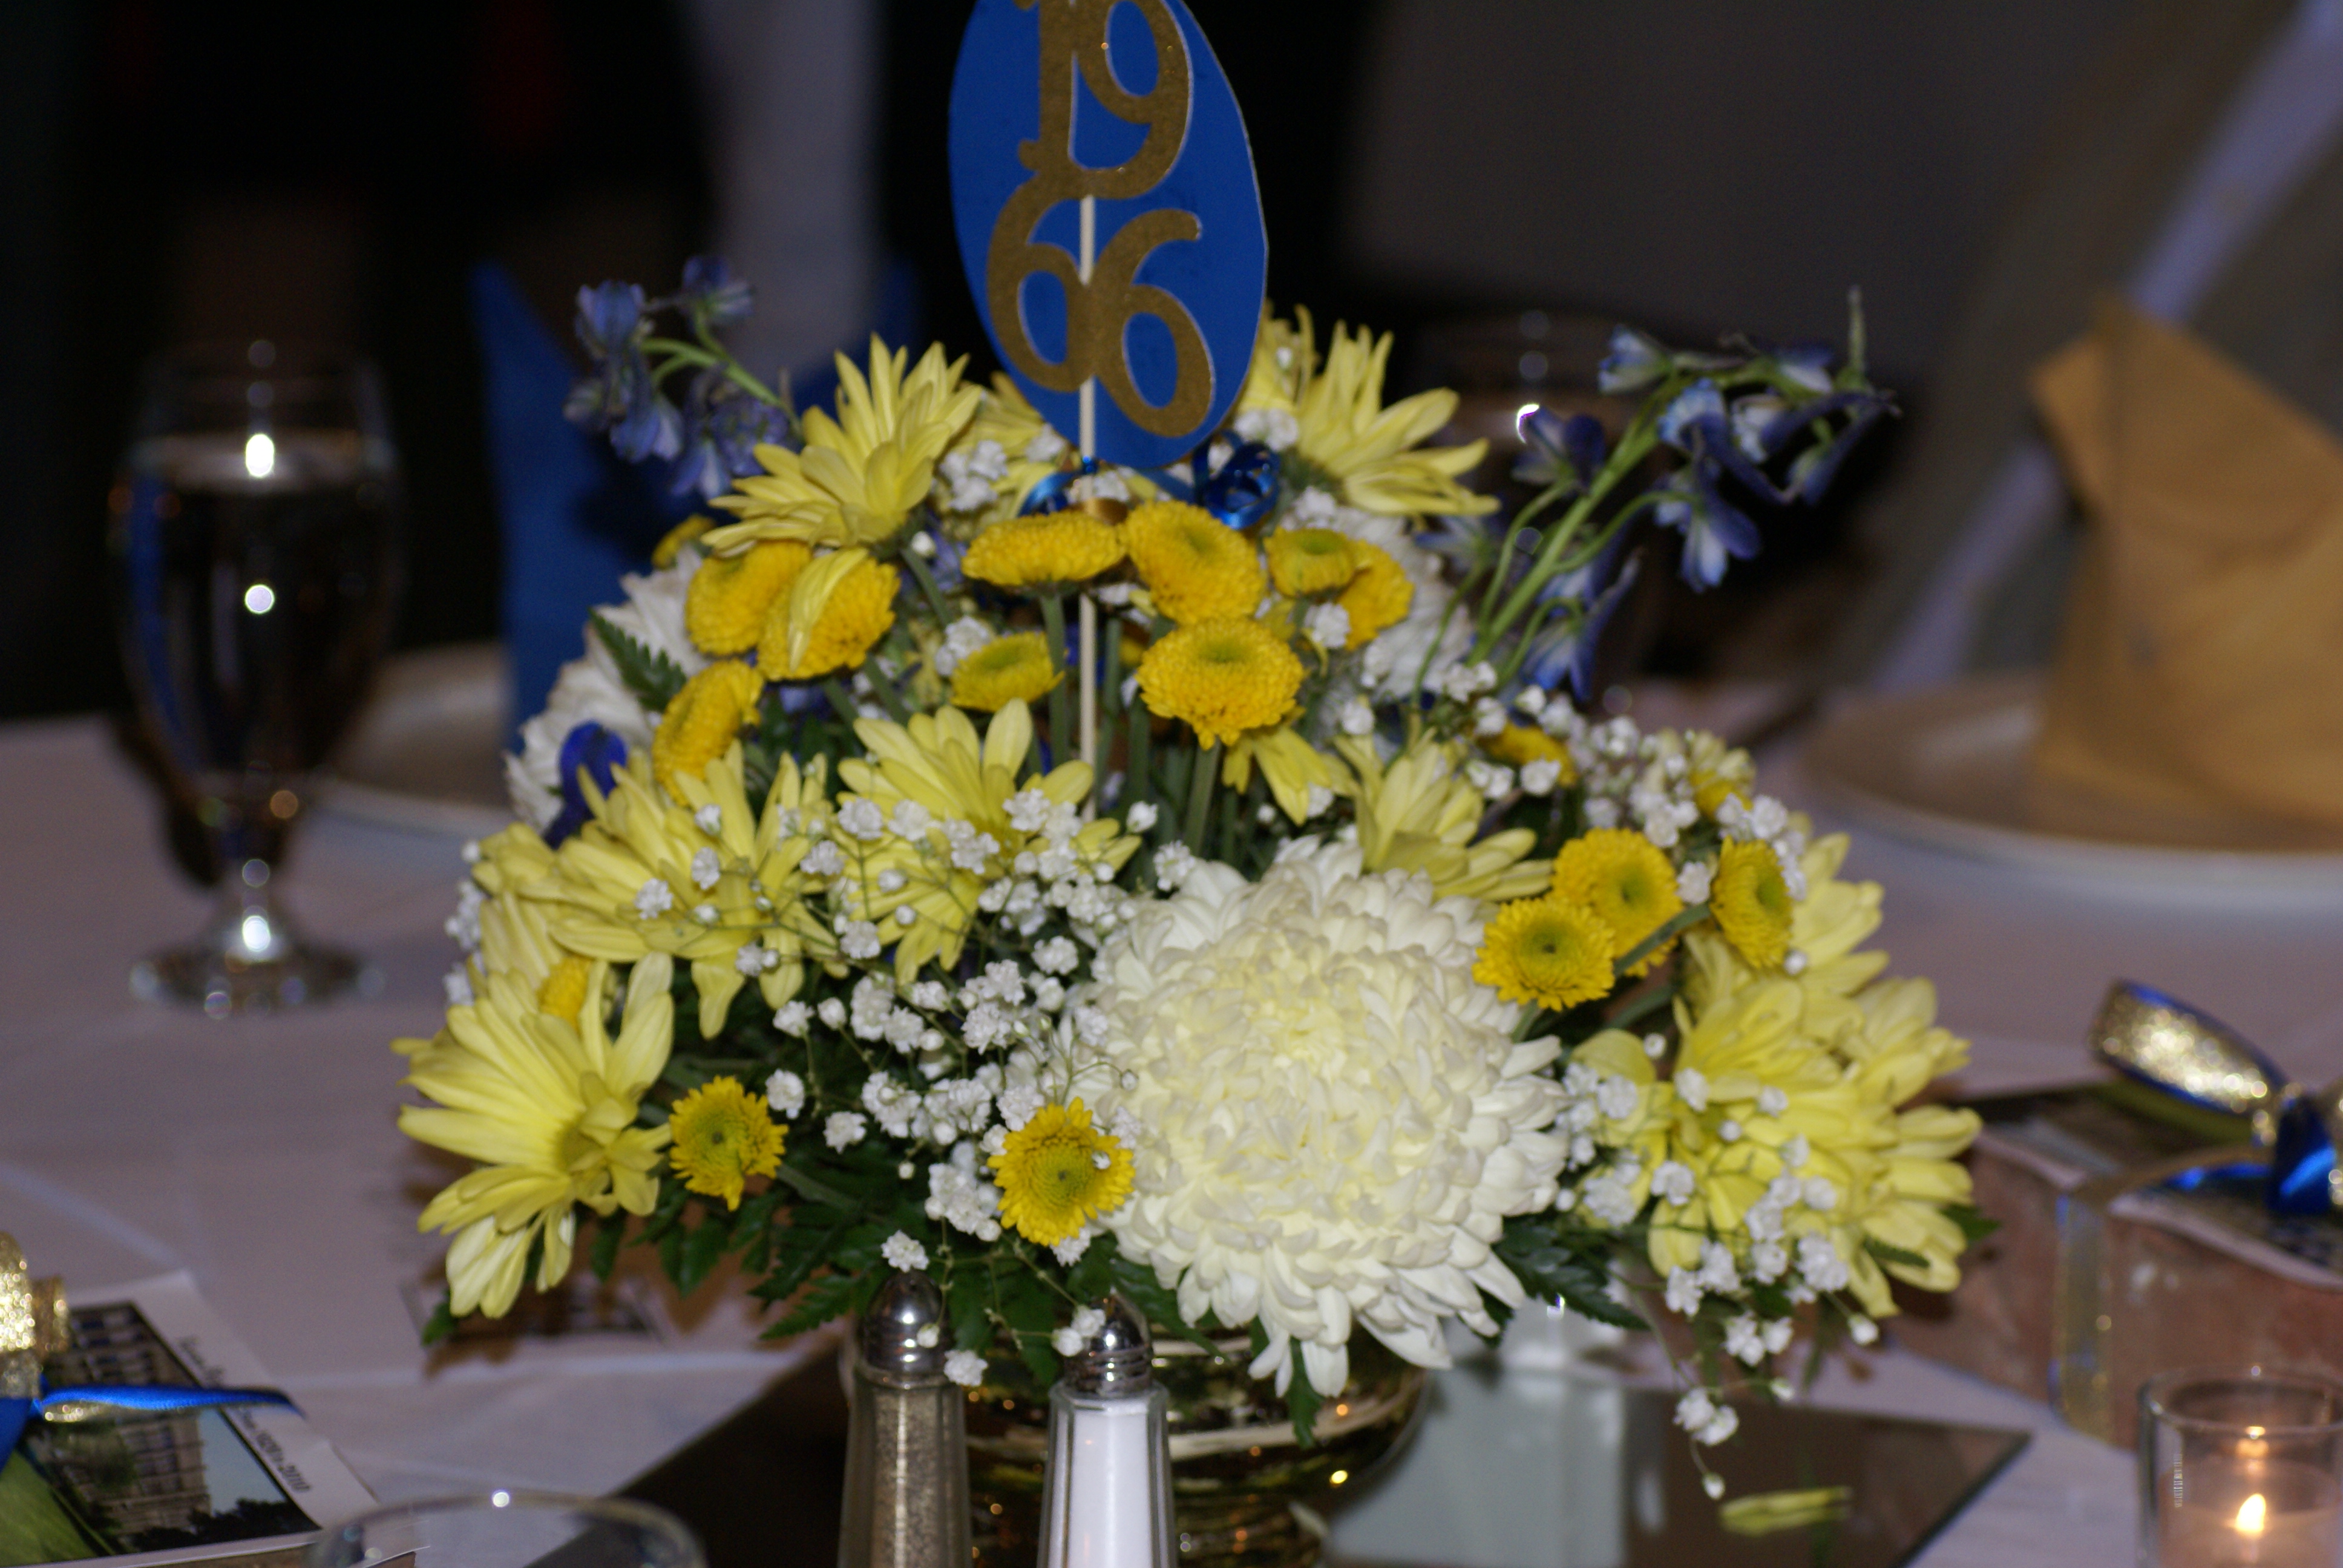 Thank you to Susie Harris for creating these beautiful centerpieces.